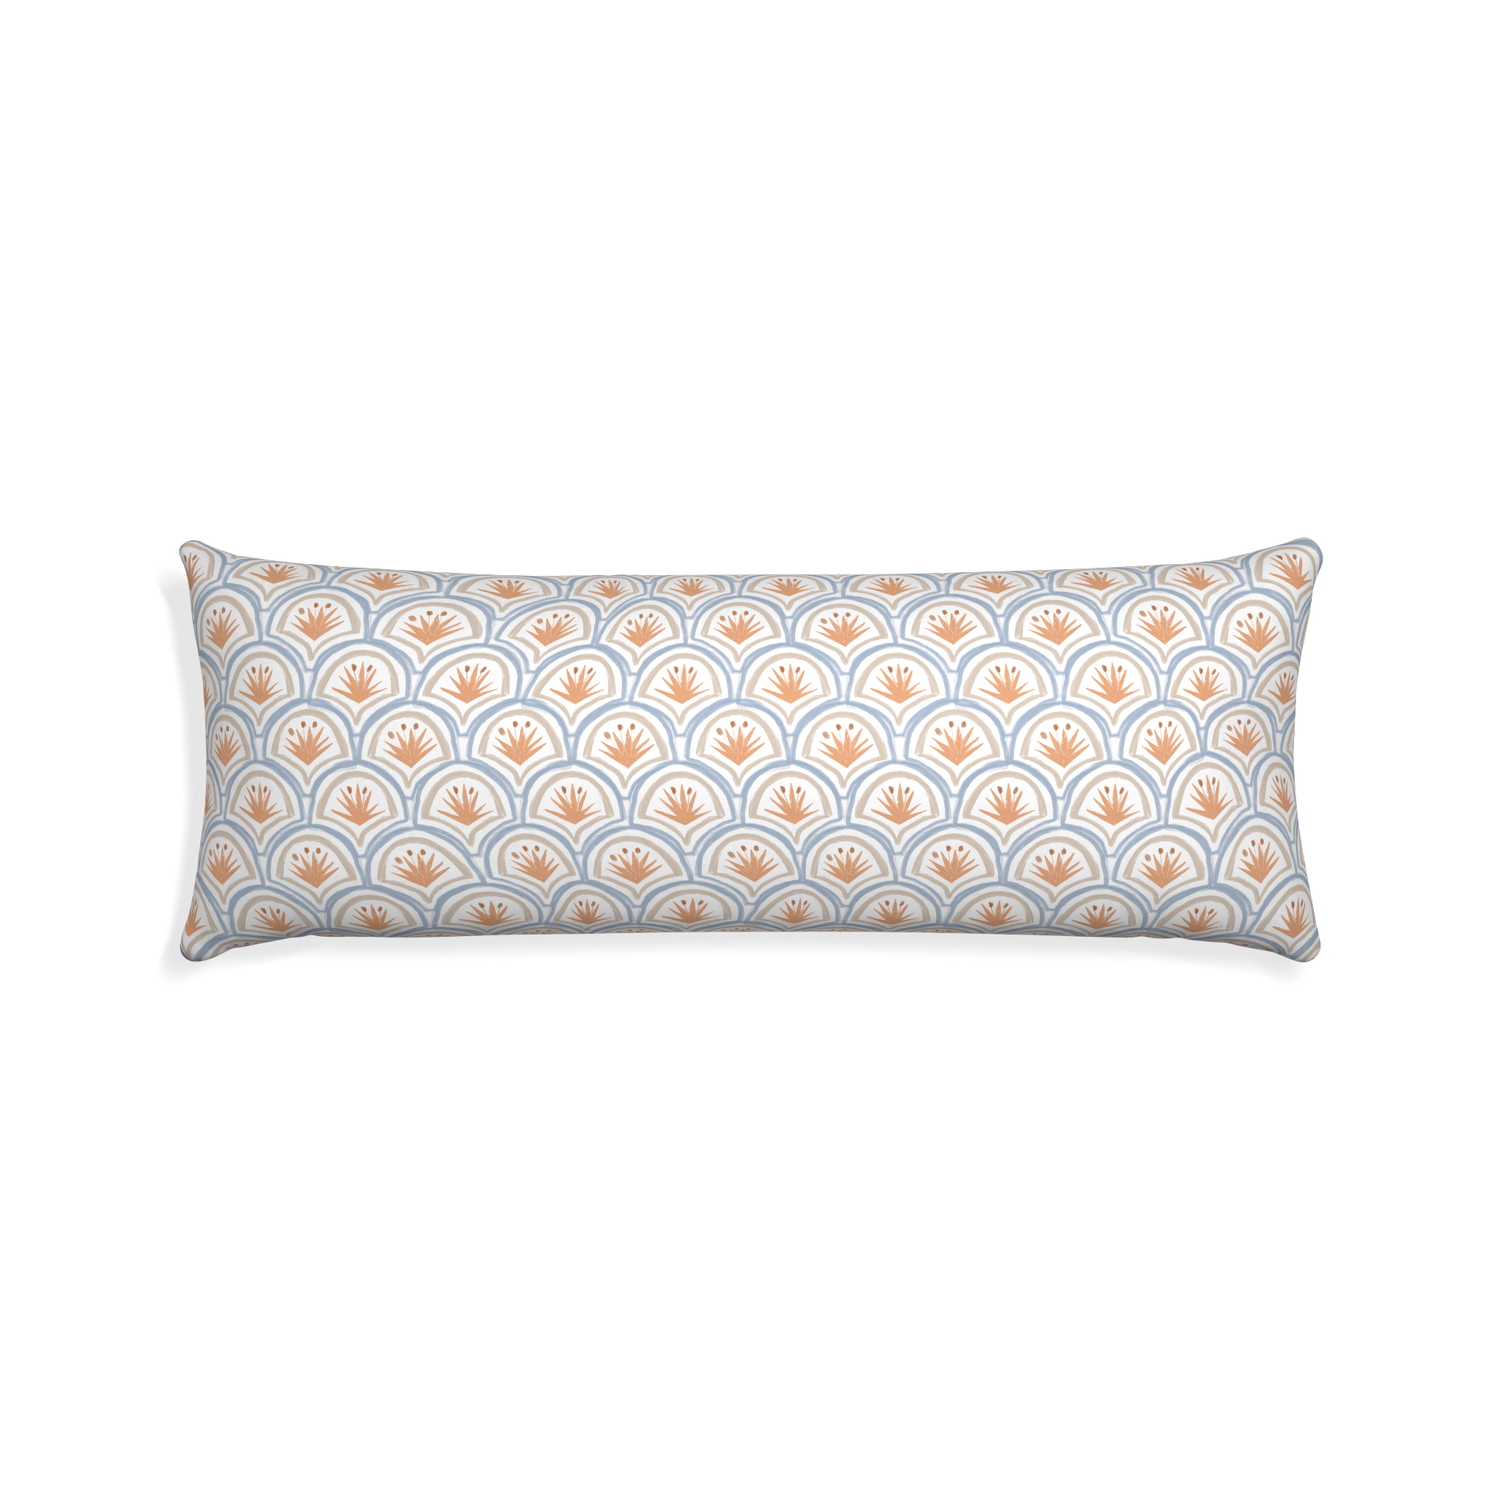 Xl-lumbar thatcher apricot custom art deco palm patternpillow with none on white background